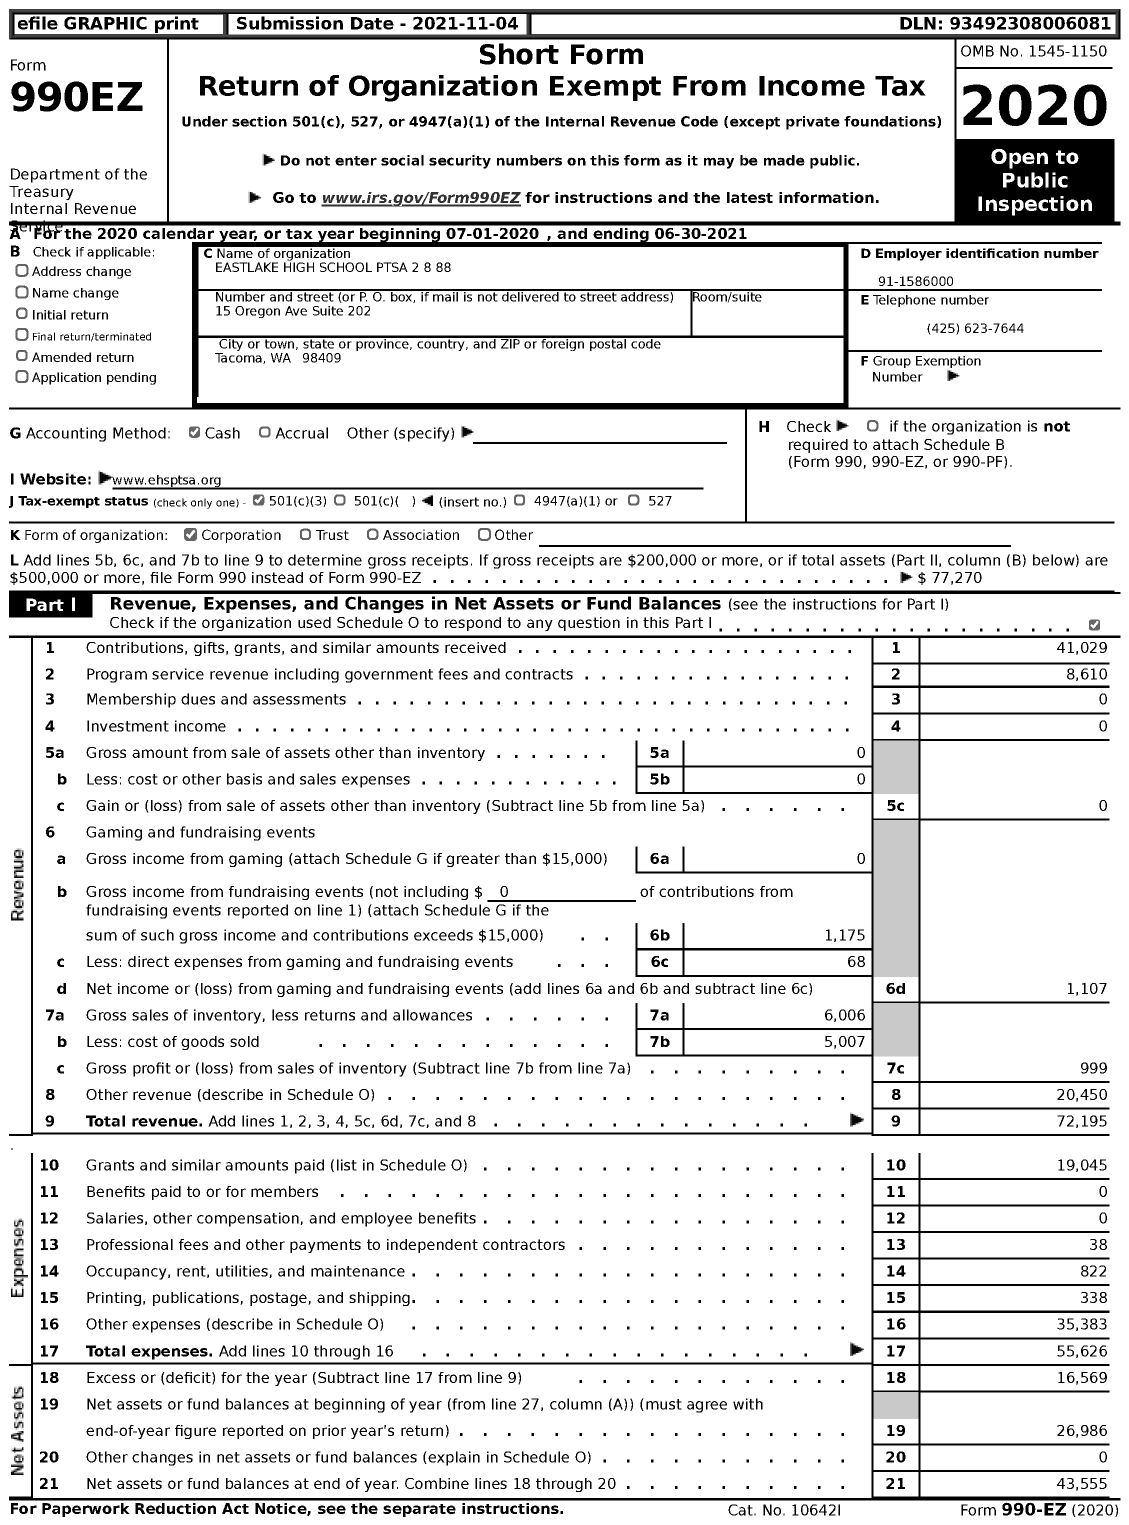 Image of first page of 2020 Form 990EZ for Eastlake High School Ptsa 2888 8 88